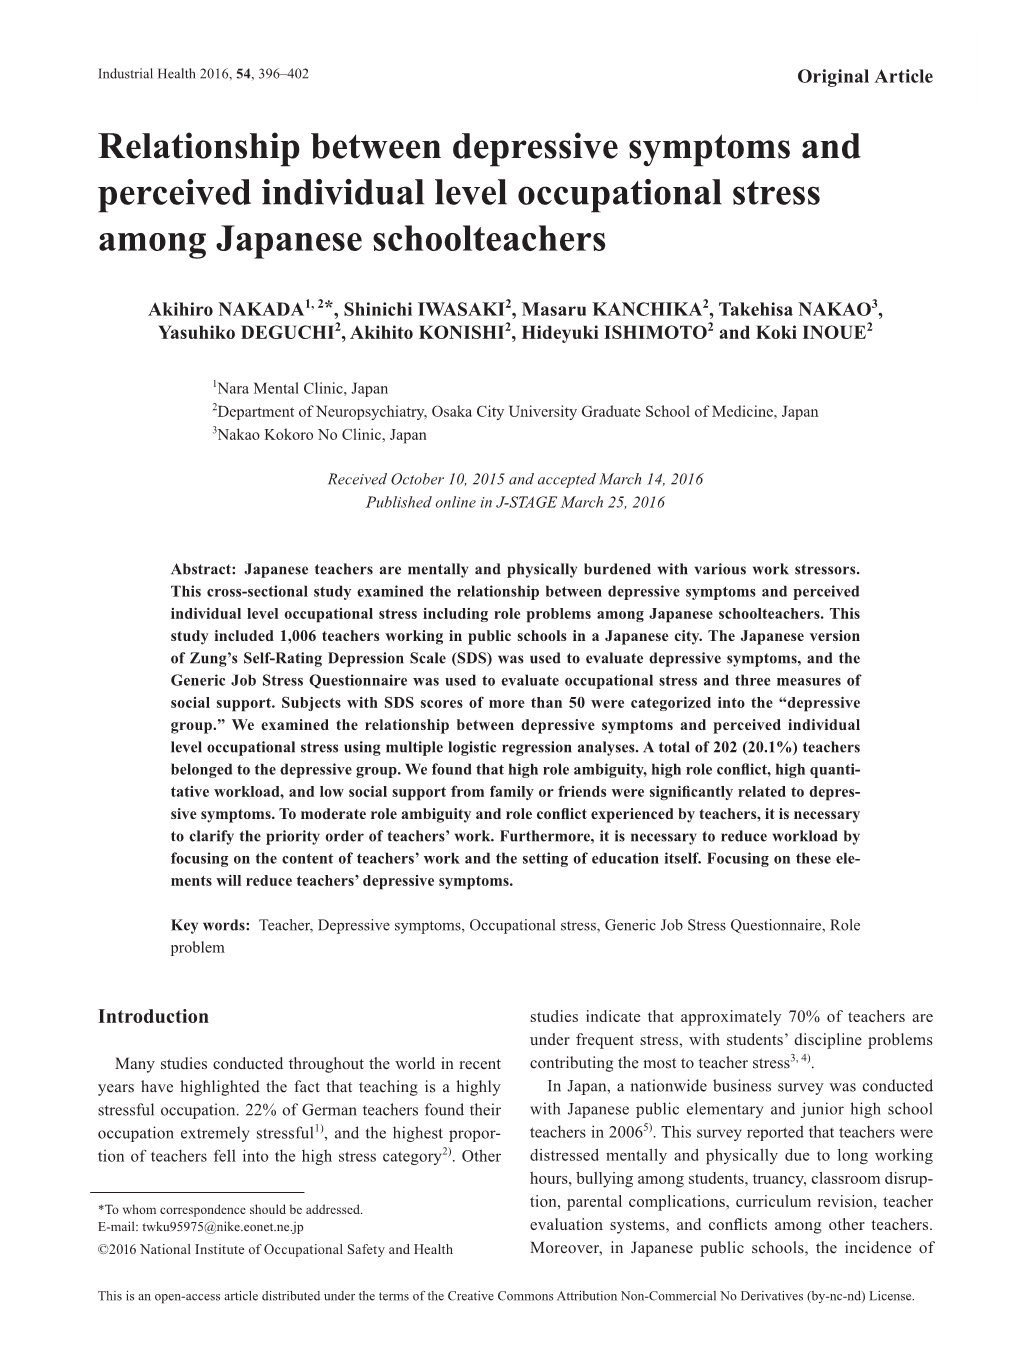 Relationship Between Depressive Symptoms and Perceived Individual Level Occupational Stress Among Japanese Schoolteachers